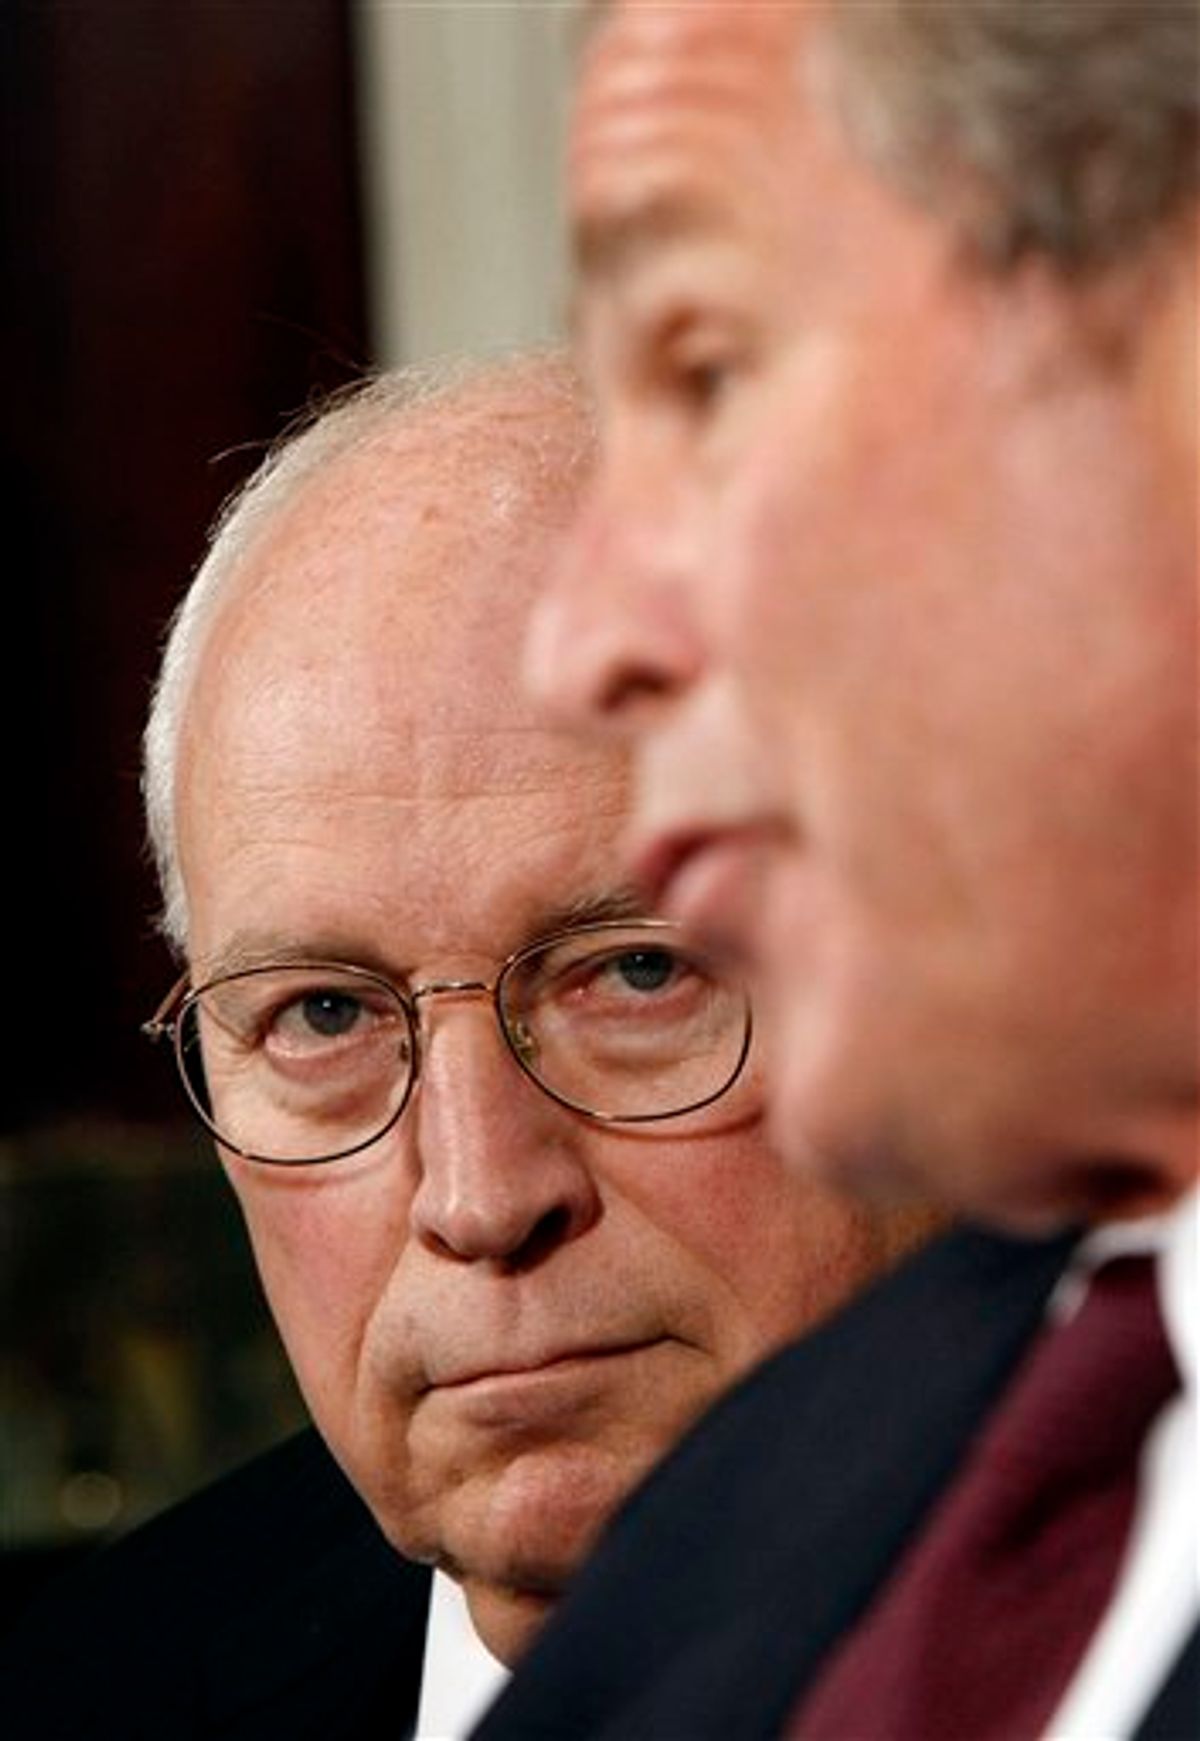 FILE - In this Sept. 15, 2008 file photo, Vice President Dick Cheney, left, looks over to President George W. Bush, after the president  received an update on Hurricane Ike and relief efforts on energy matters from members of the Cabinet, in the Roosevelt Room of the White House in Washington. George W. Bush knows that history will shape his legacy more than anything he can say. But that's not gonna stop a guy from trying. After two years of near silence, Bush is back. With his new memoir and a promotion tour, the president who in cockier times could not think of a single mistake he had made, lists many.  (AP Photo/Pablo Martinez Monsivais, File)    (AP)